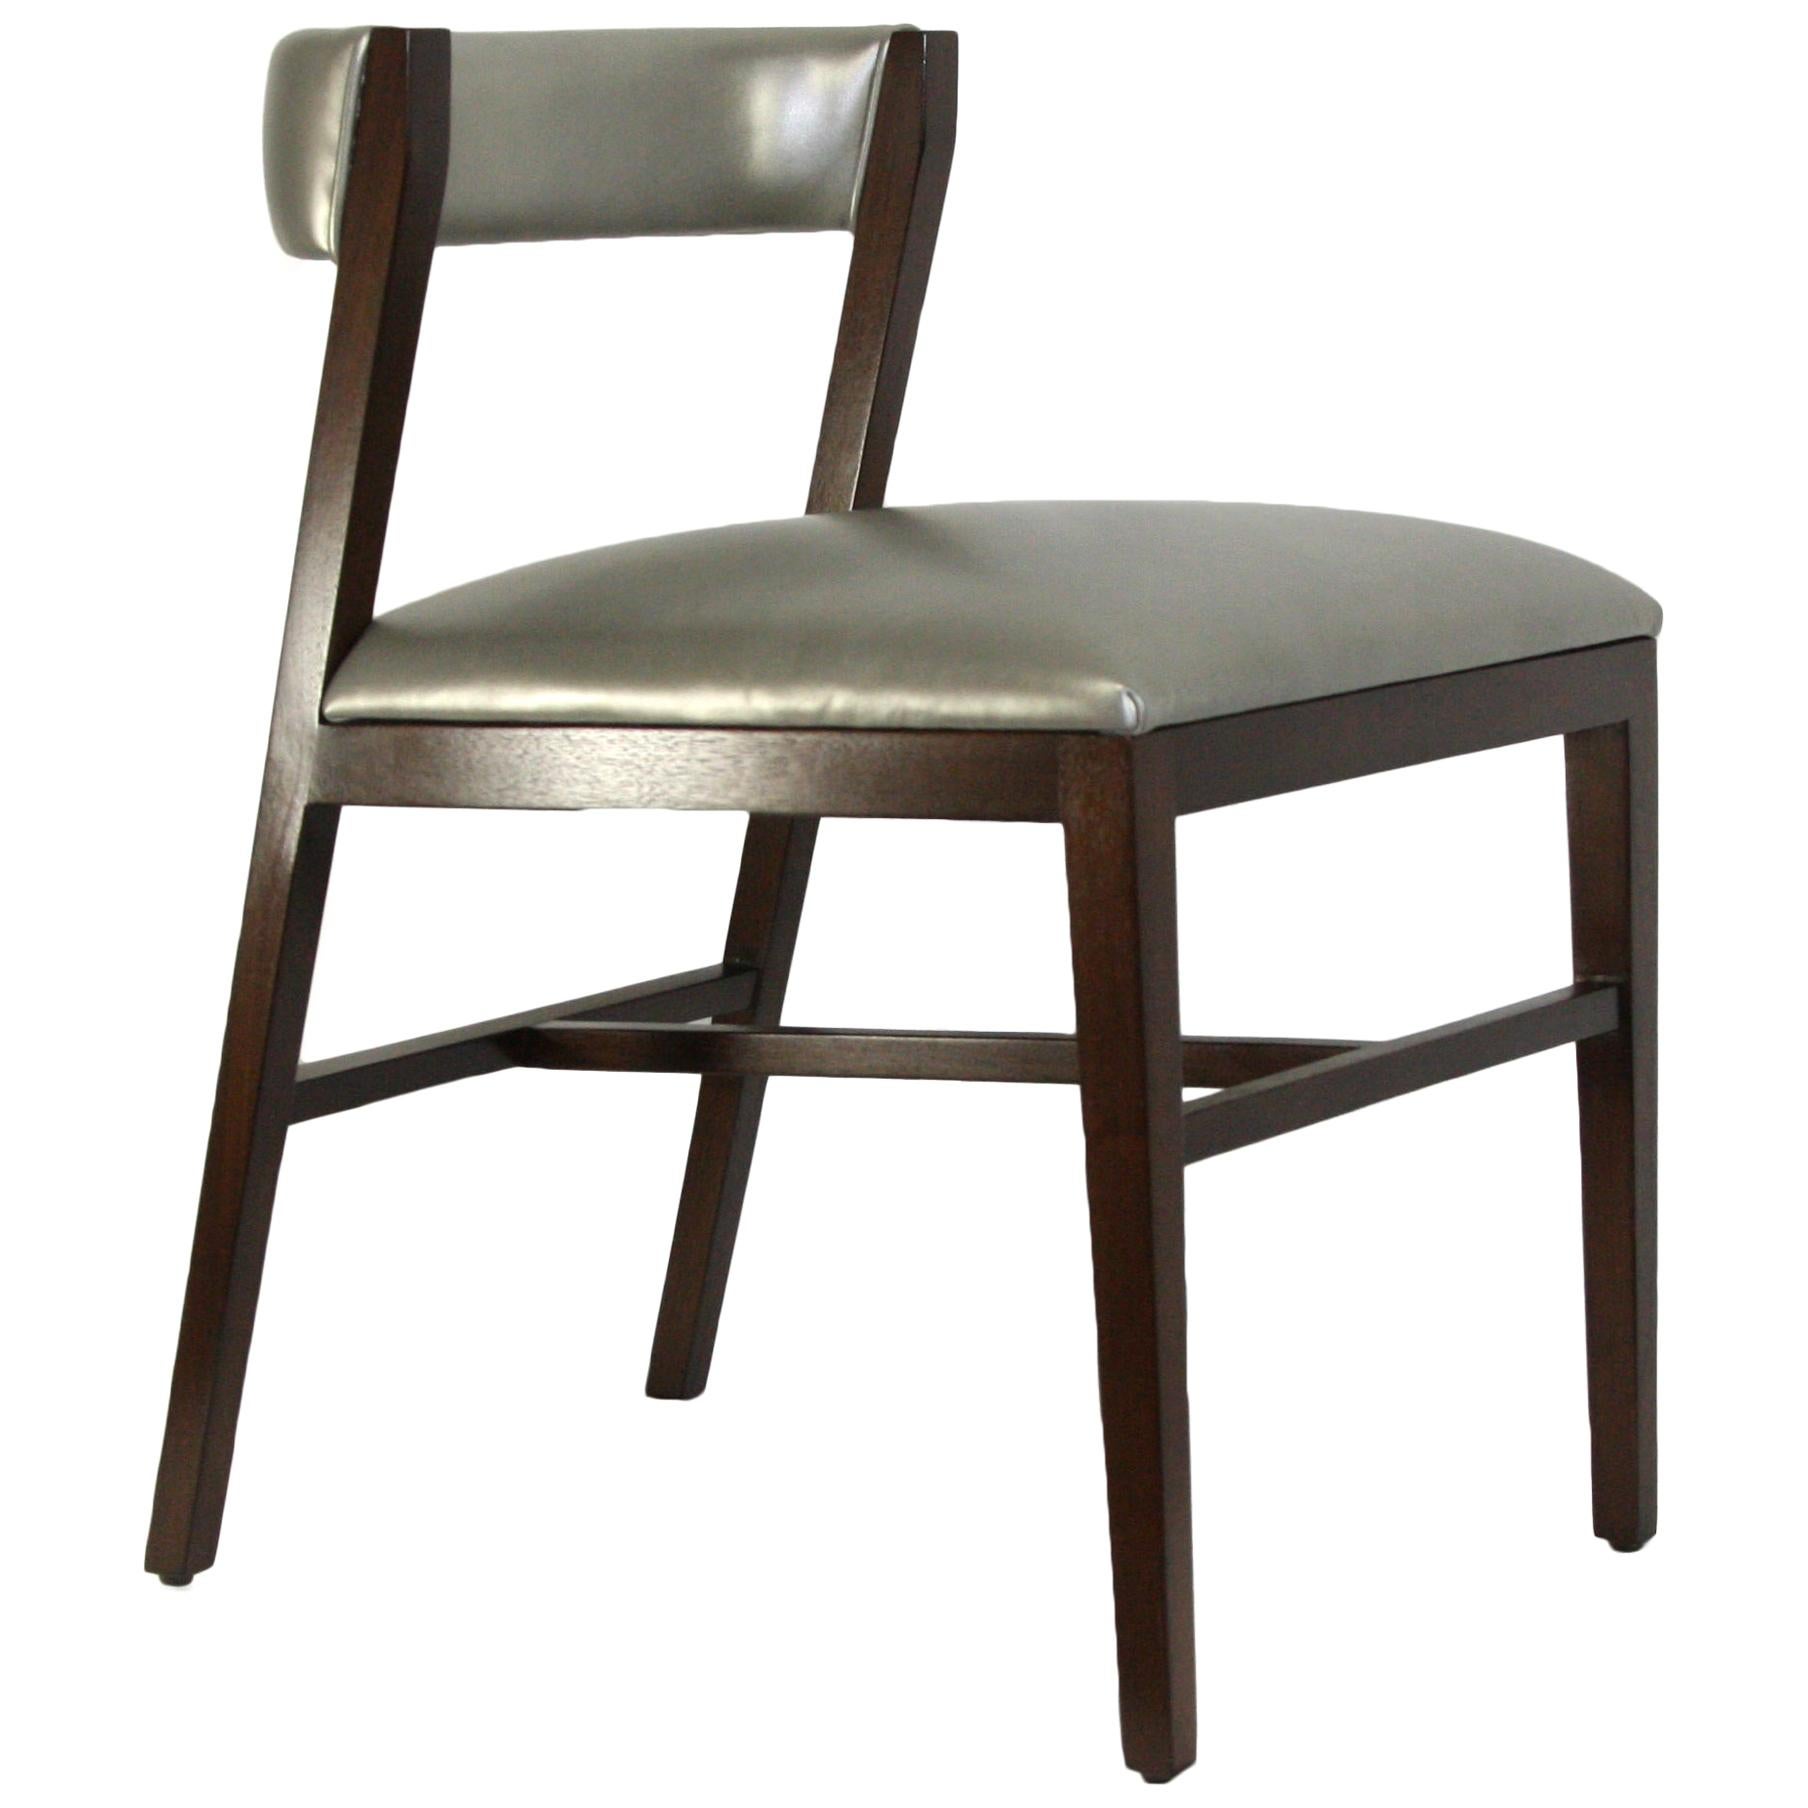 Mid CenturyWalnut Dining Chair with leather upholstery in Black orBrown Leather